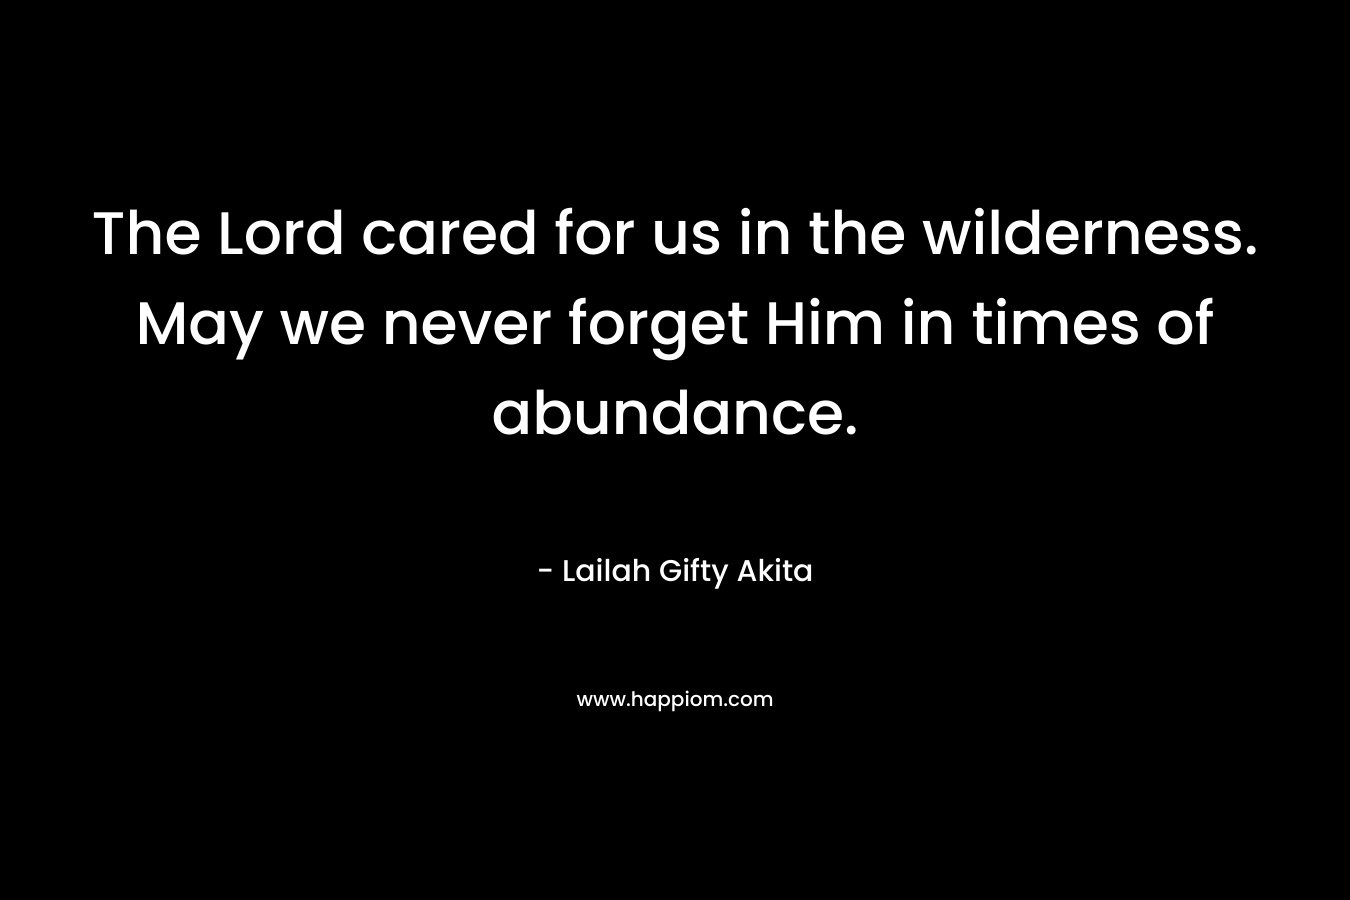 The Lord cared for us in the wilderness. May we never forget Him in times of abundance.